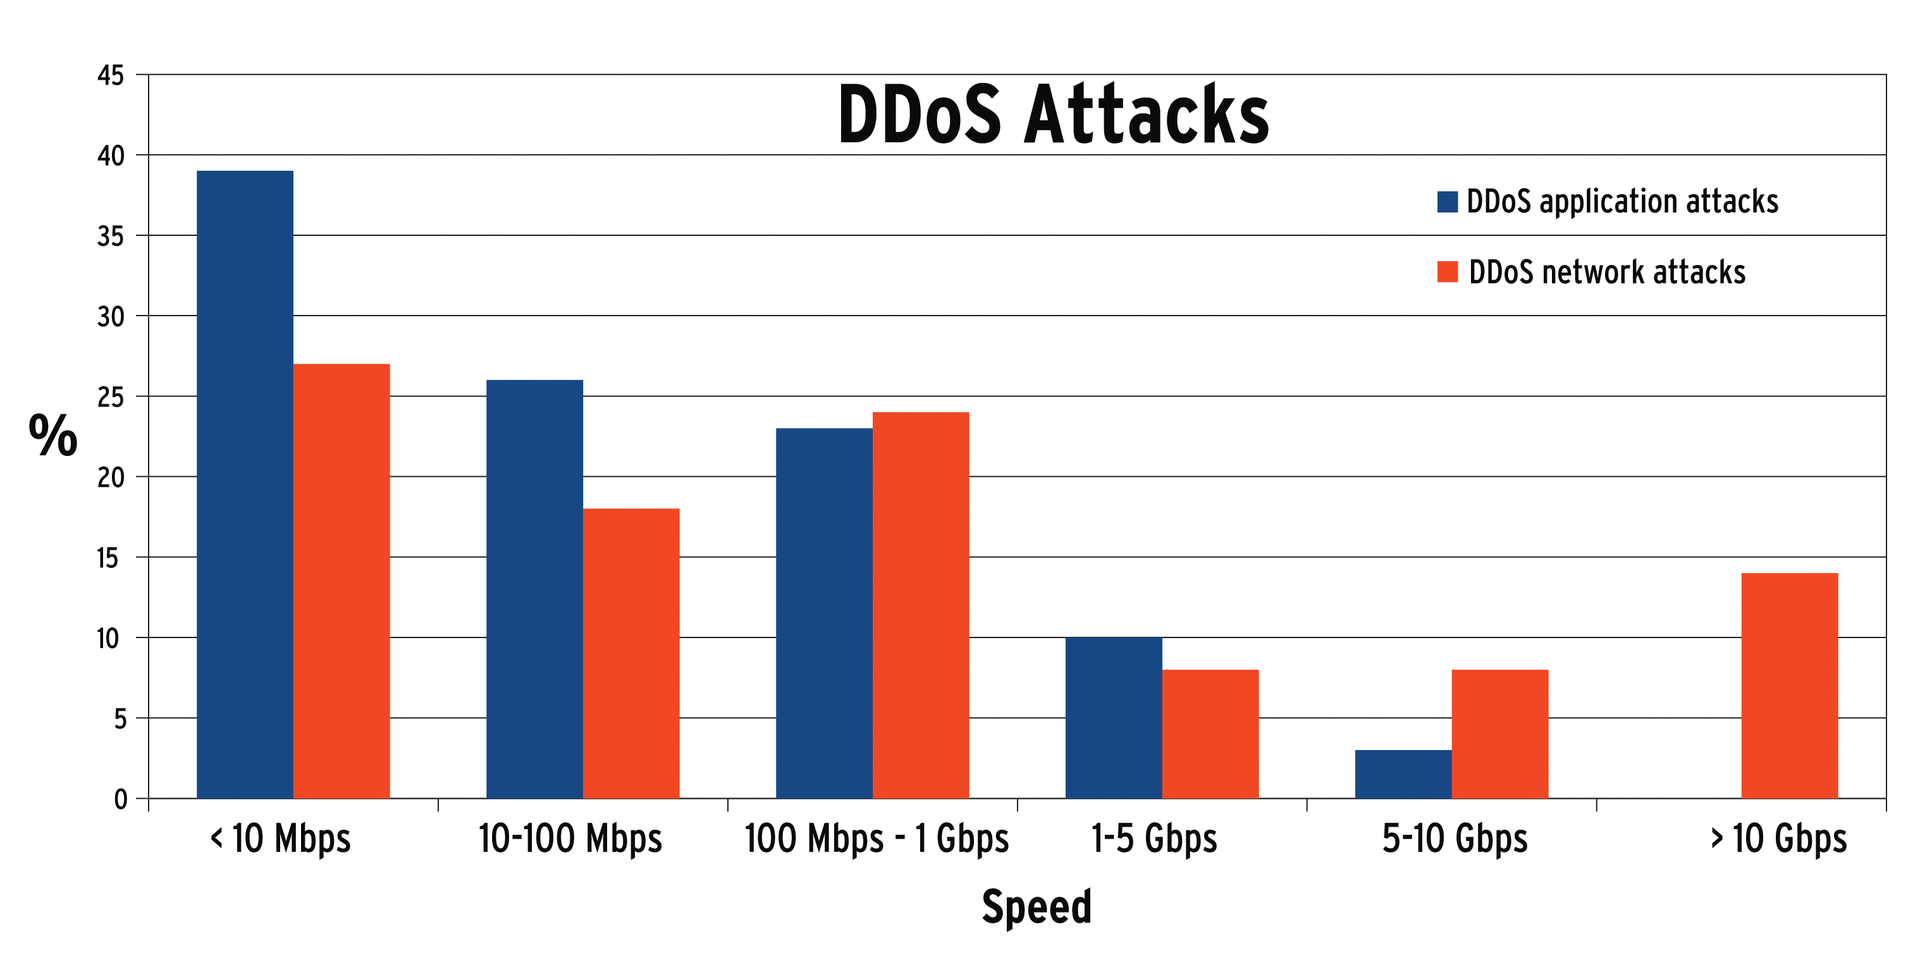 Data volumes of typical DDoS attacks against network resources (red) and server applications (blue). 